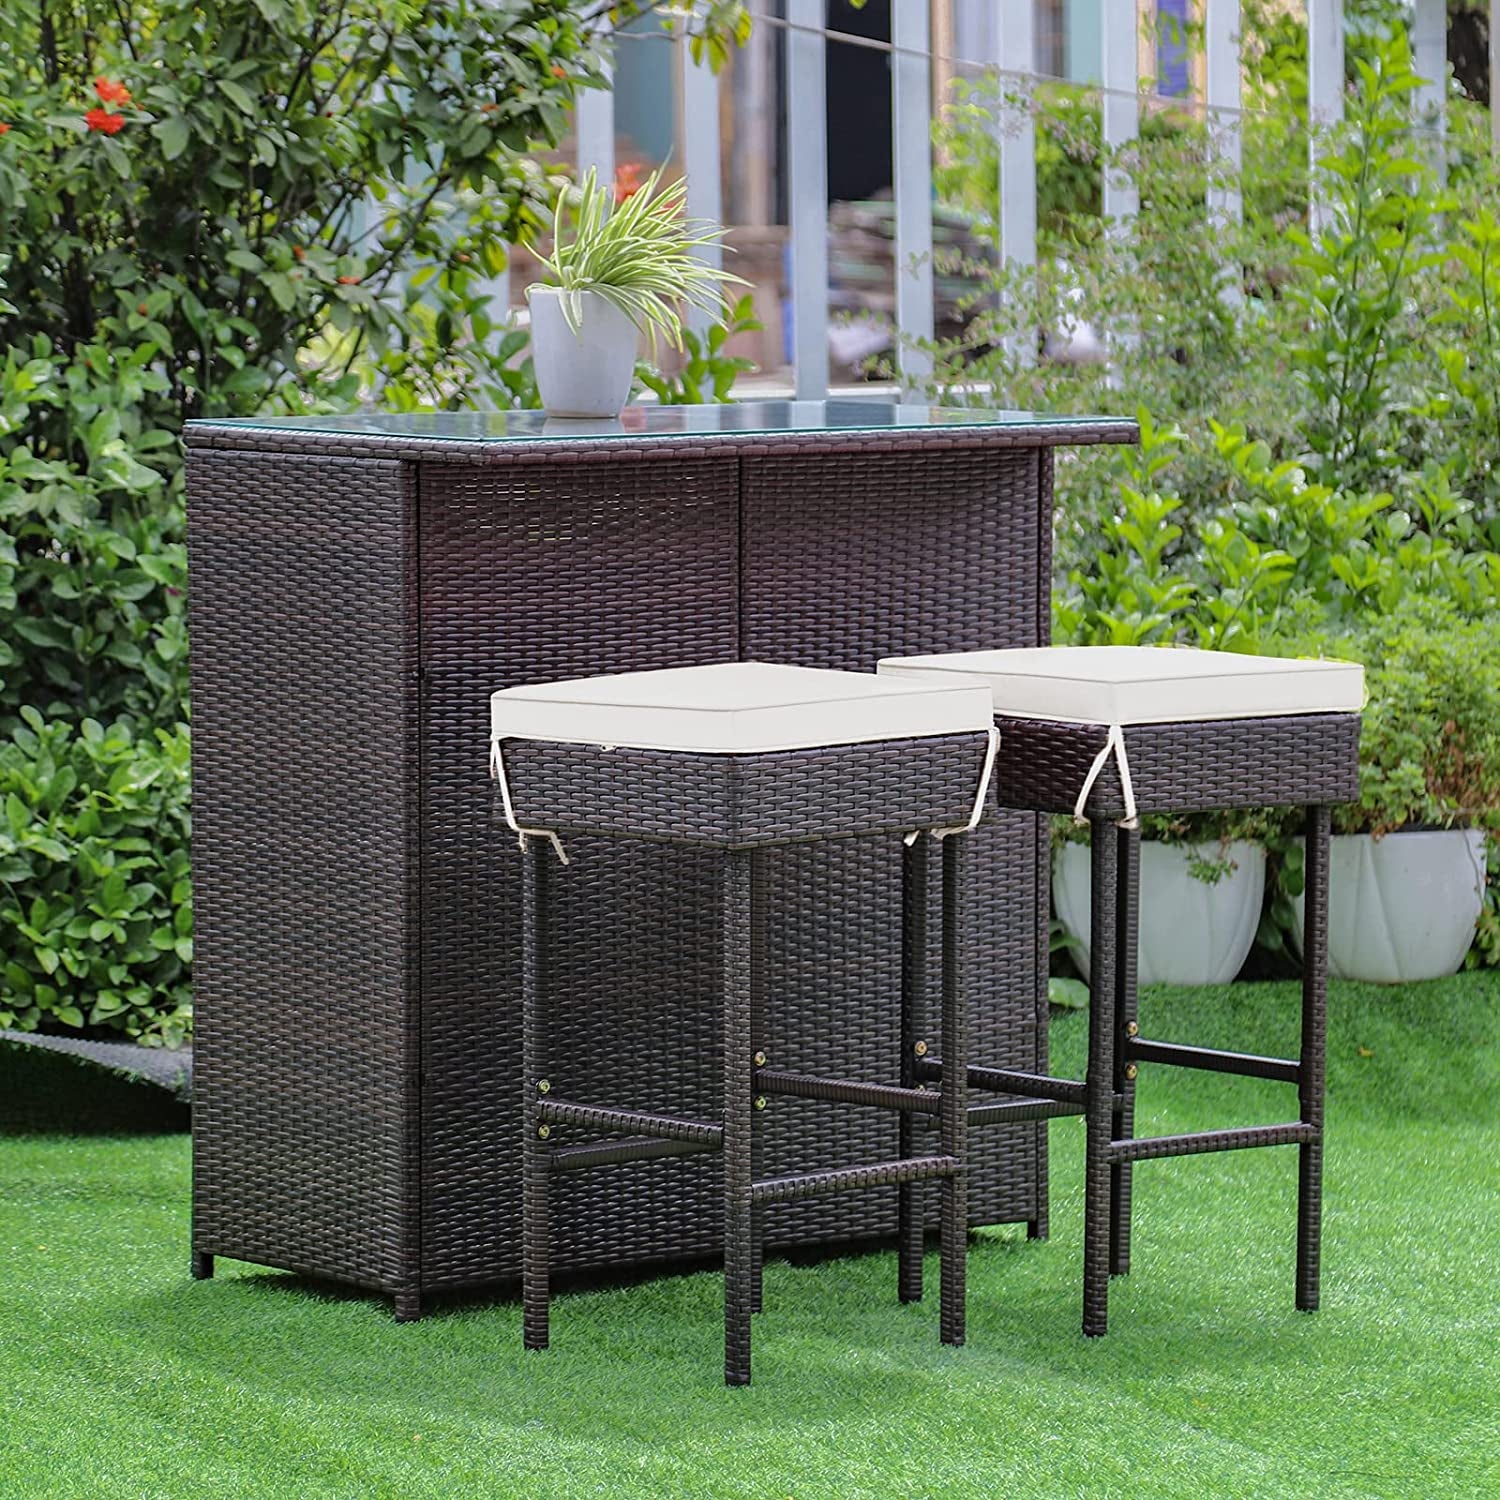 RELAX4FLIE 3-Piece Outdoor Bar Set, Patio Wicker Bar Height Table and Chairs Set with Cushioned Stools 2 Open Shelves & Glass Table Top, Rattan Bar Table Set for Poolside, Garden and Backyard (Beige)